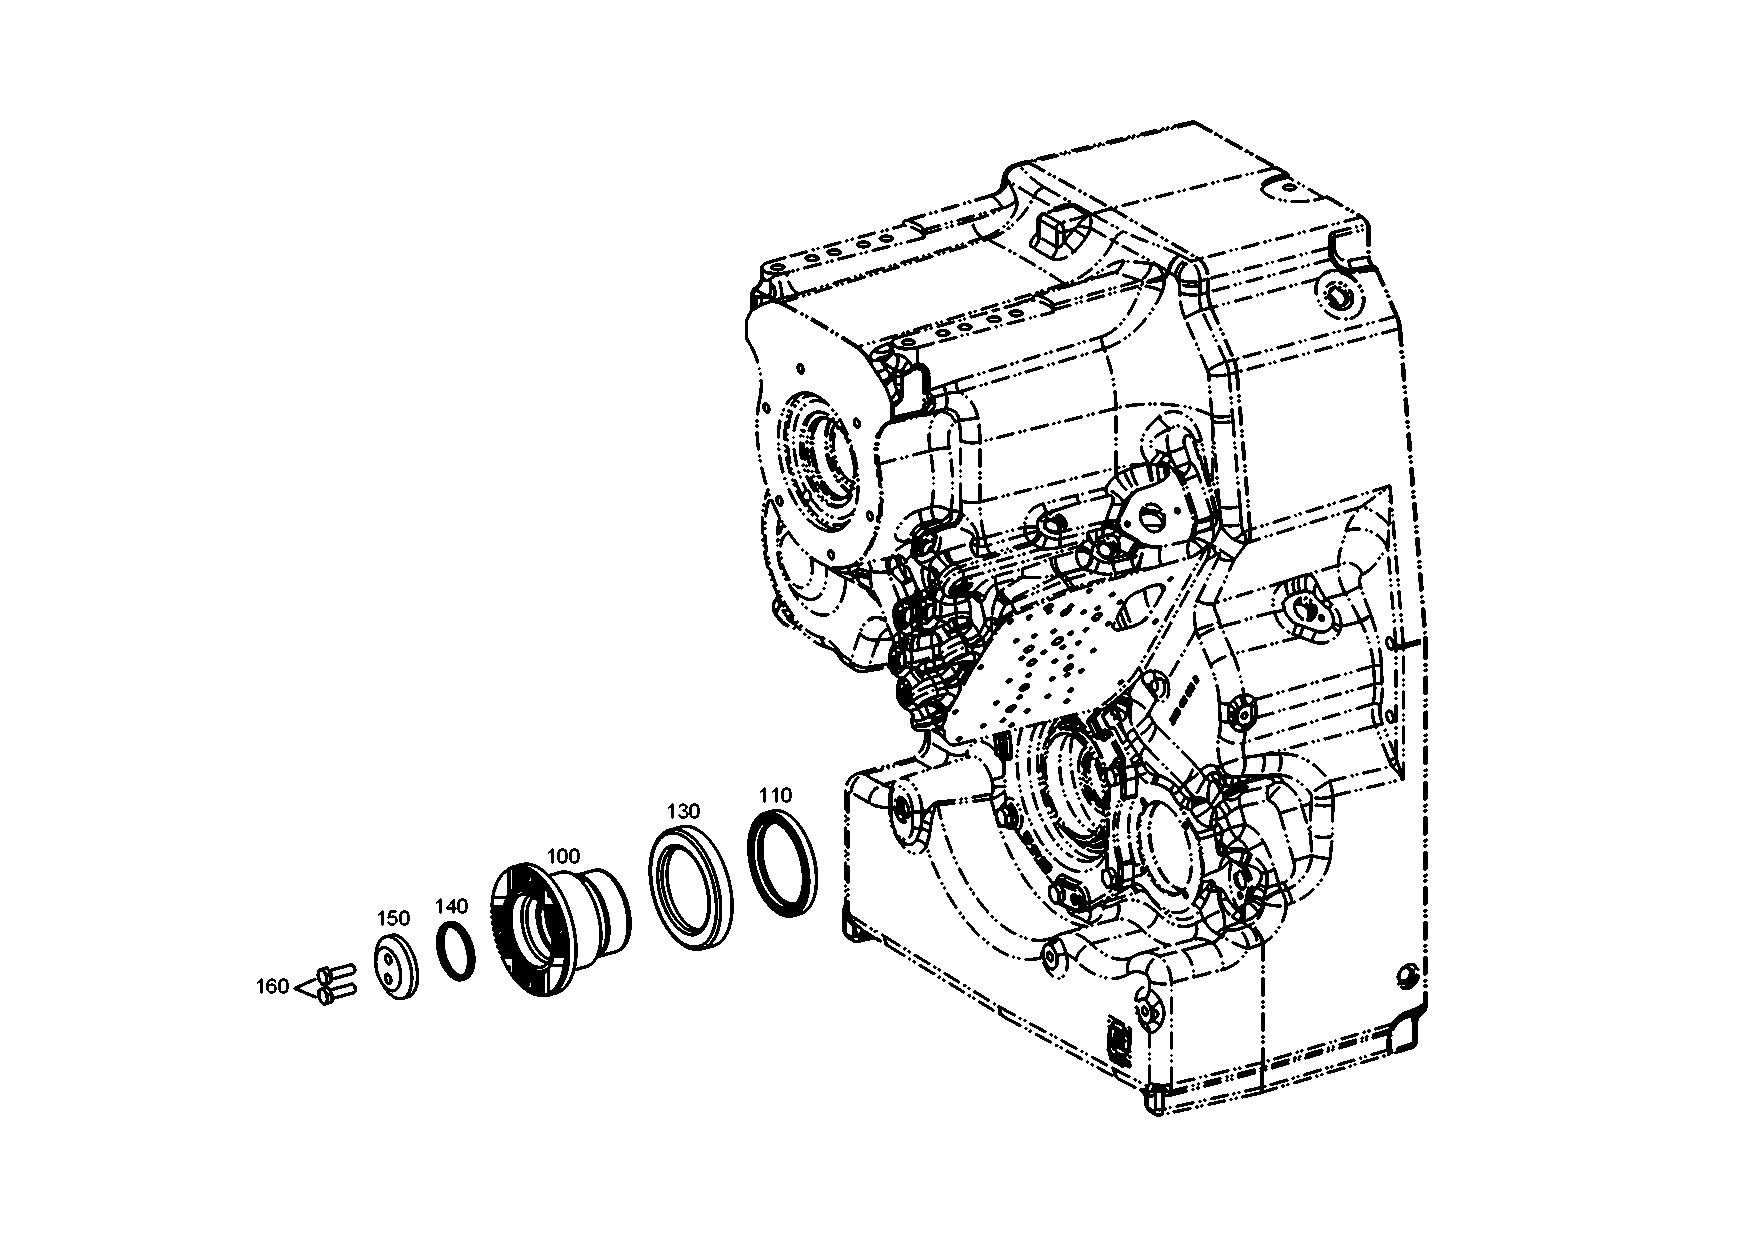 drawing for NOELL GMBH 140520691 - SHAFT SEAL (figure 4)